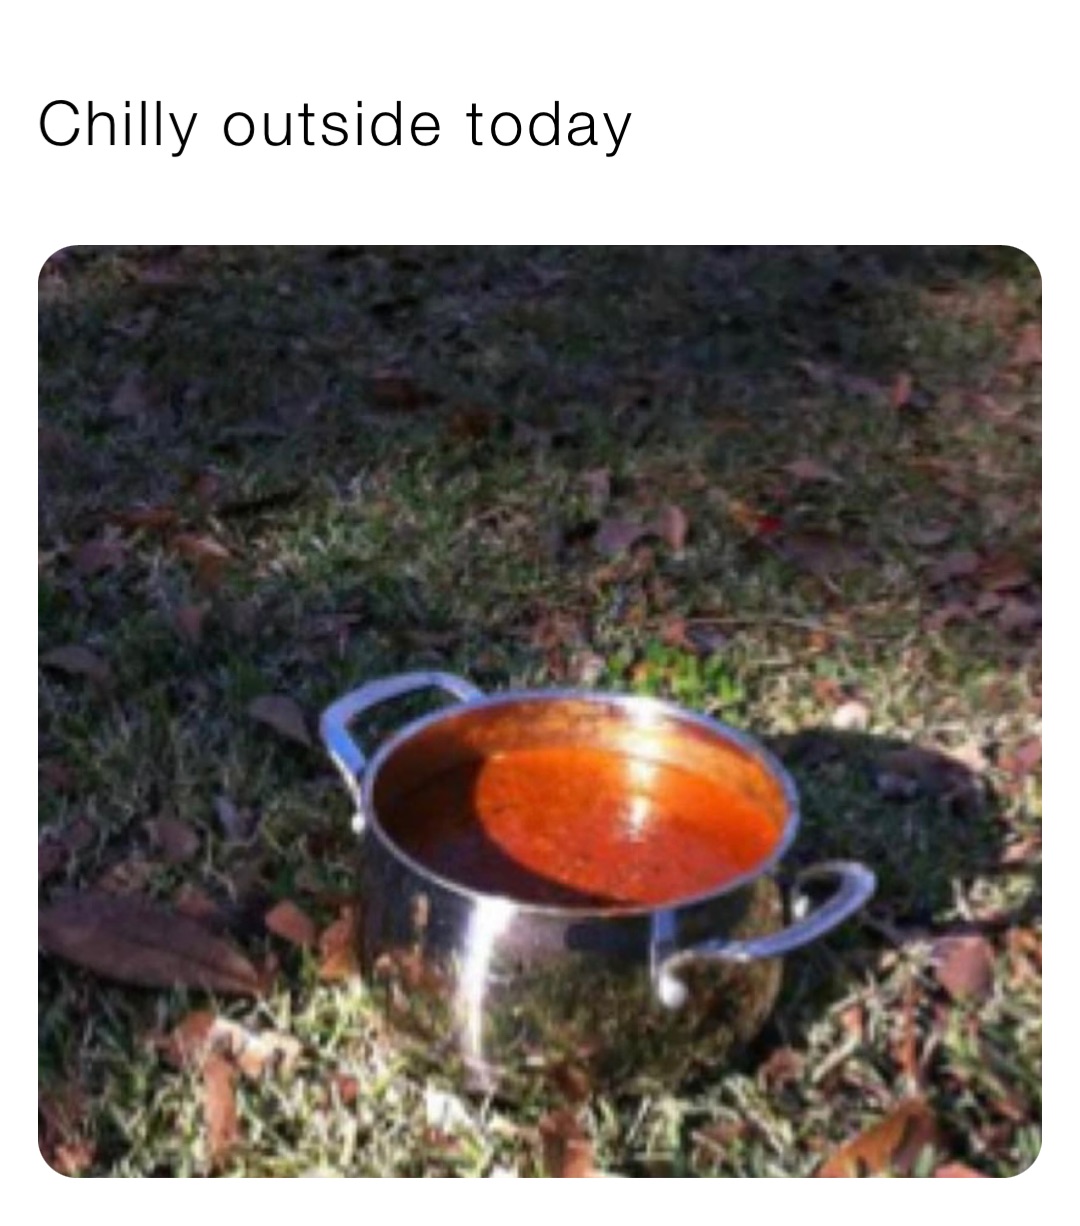 Chilly outside today